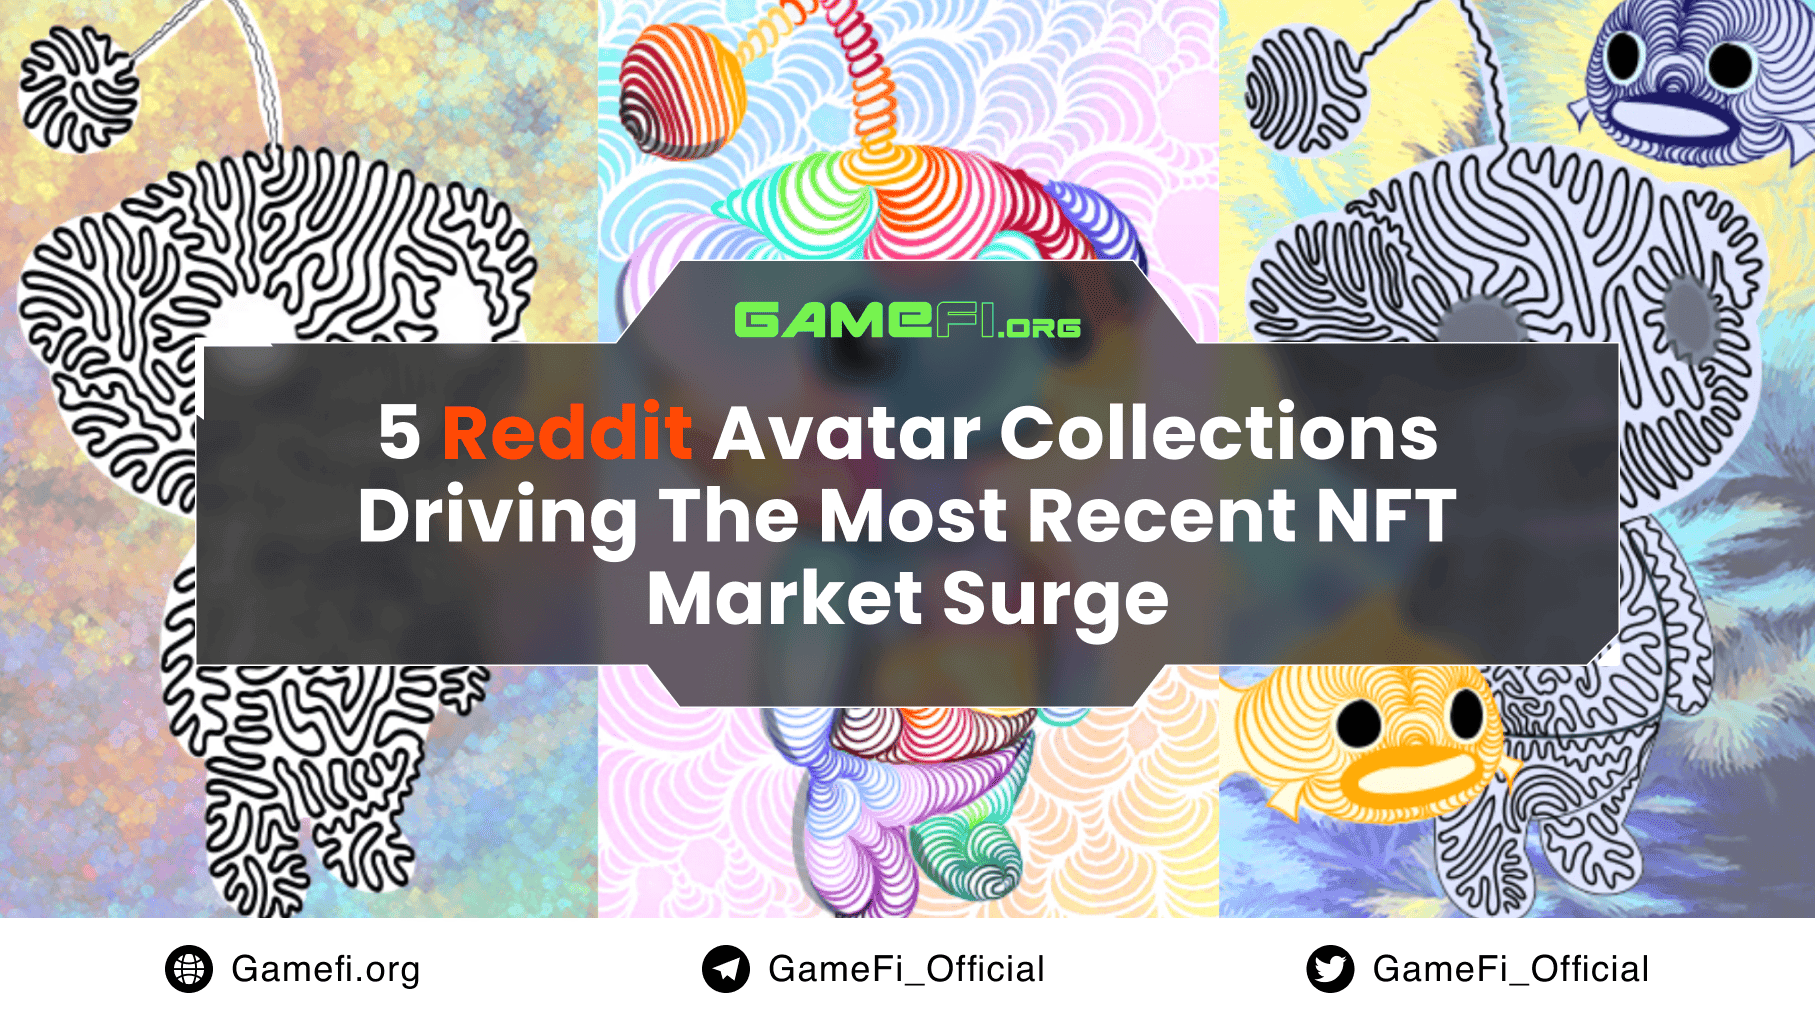 5 Reddit Avatar Collections Driving the Most Recent NFT Market Surge